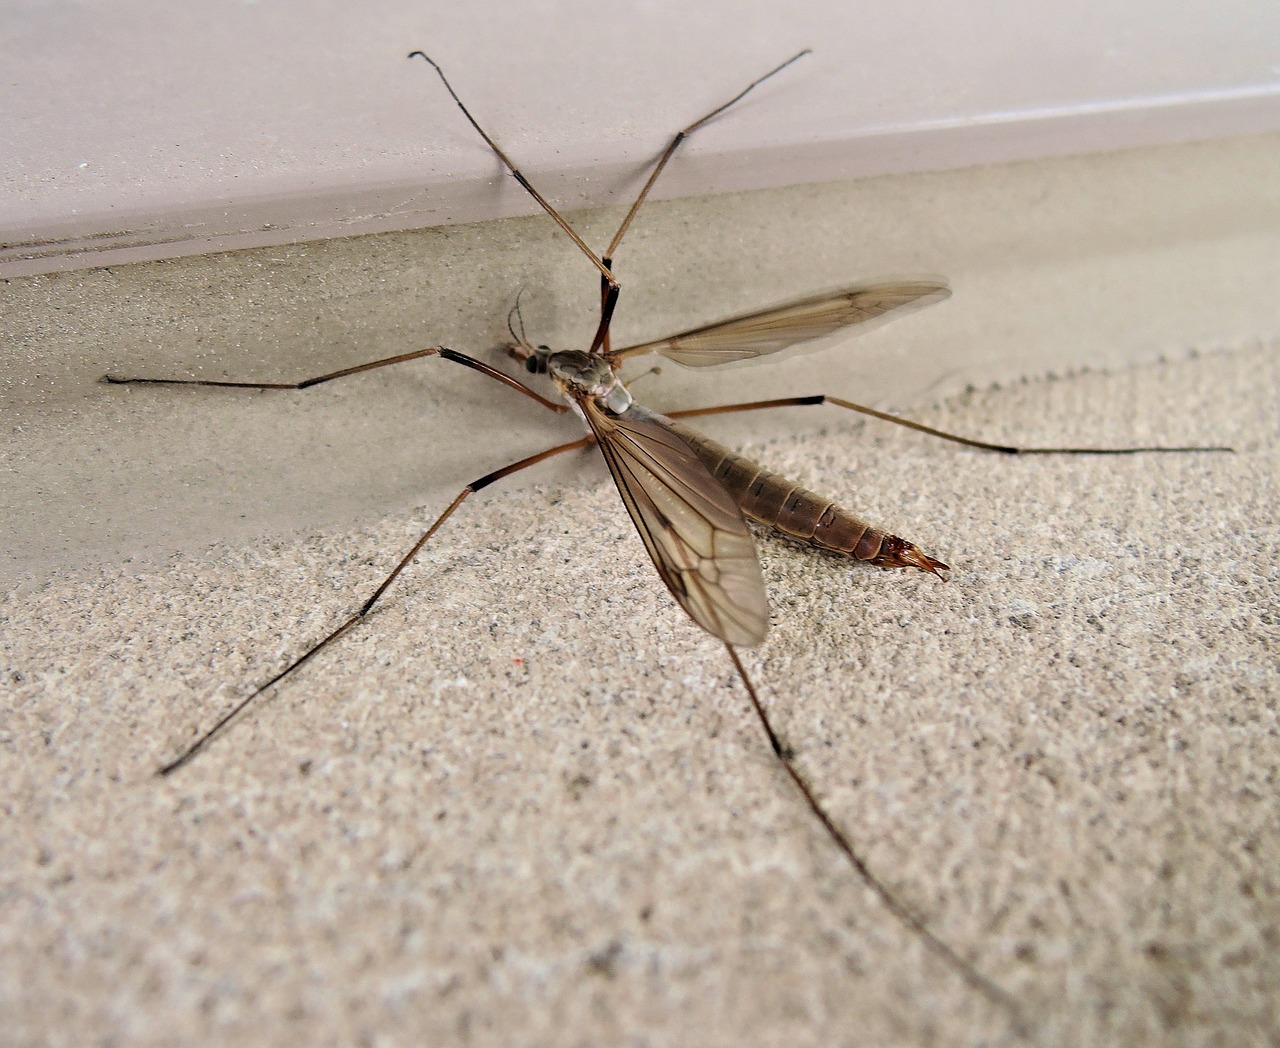 Giant Mosquito? Mosquito-Eater? Nope, Its a Crane Fly!